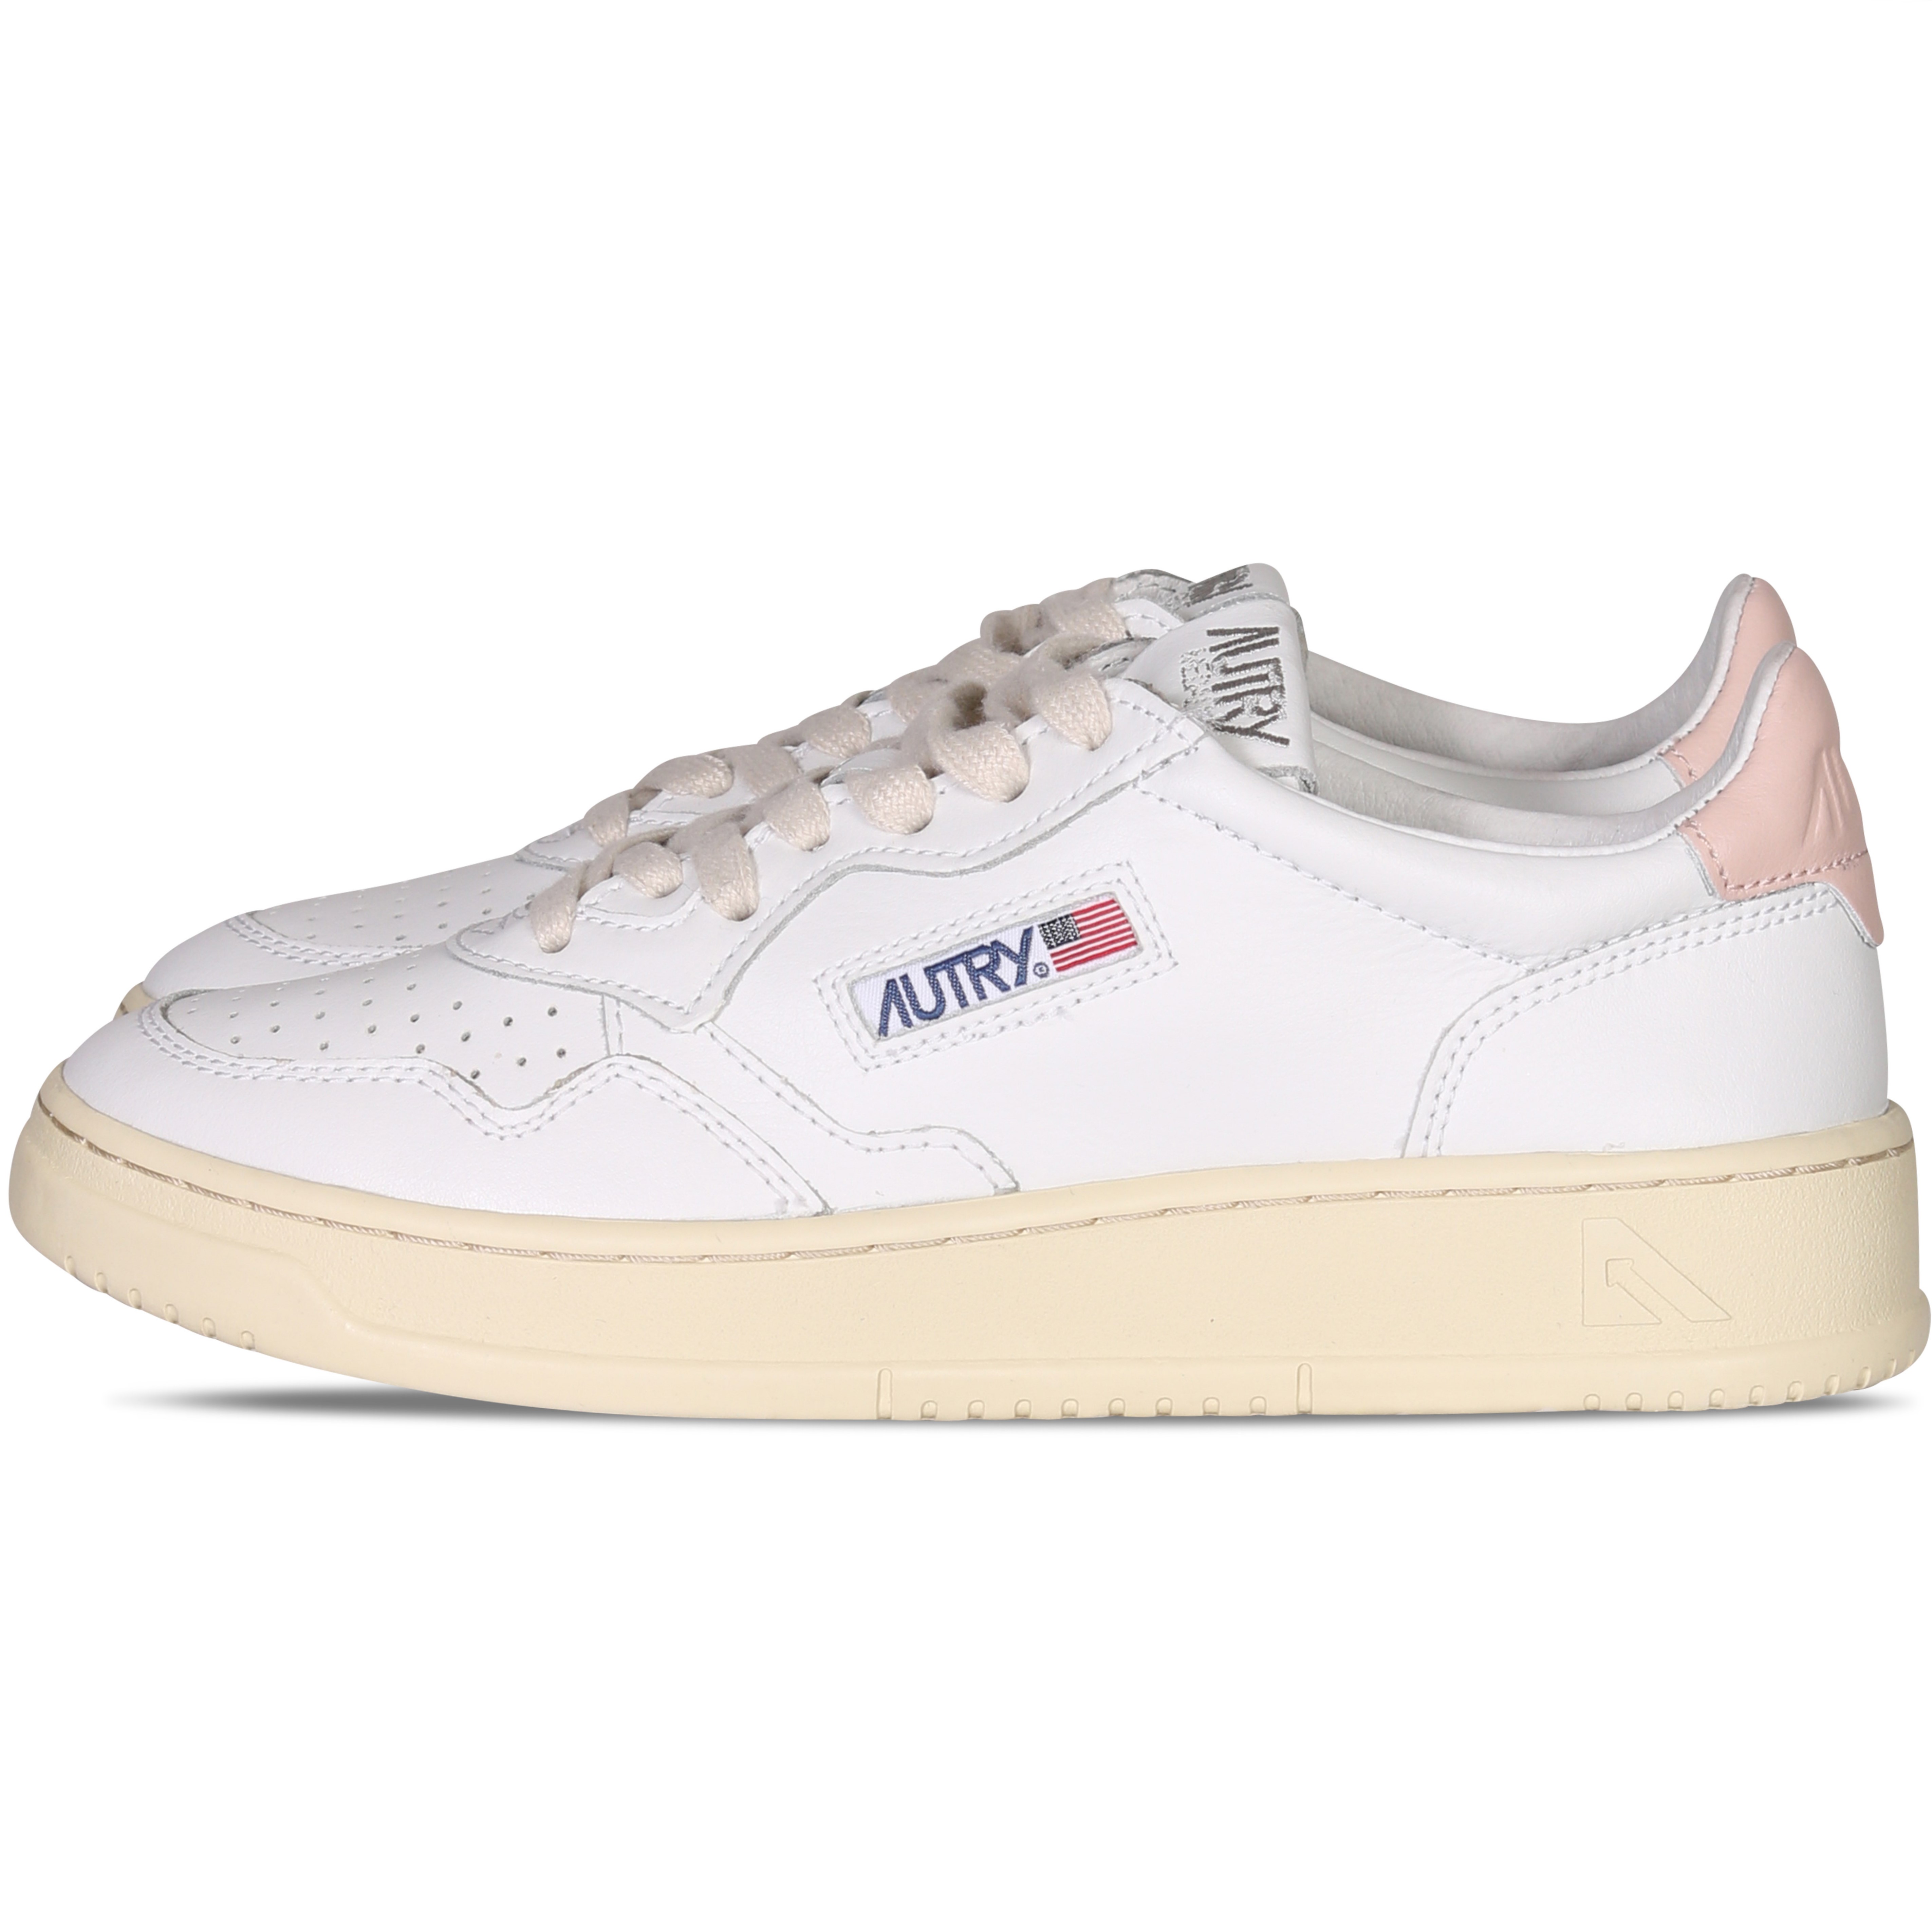 AUTRY ACTION SHOES Low Sneaker White/Pink